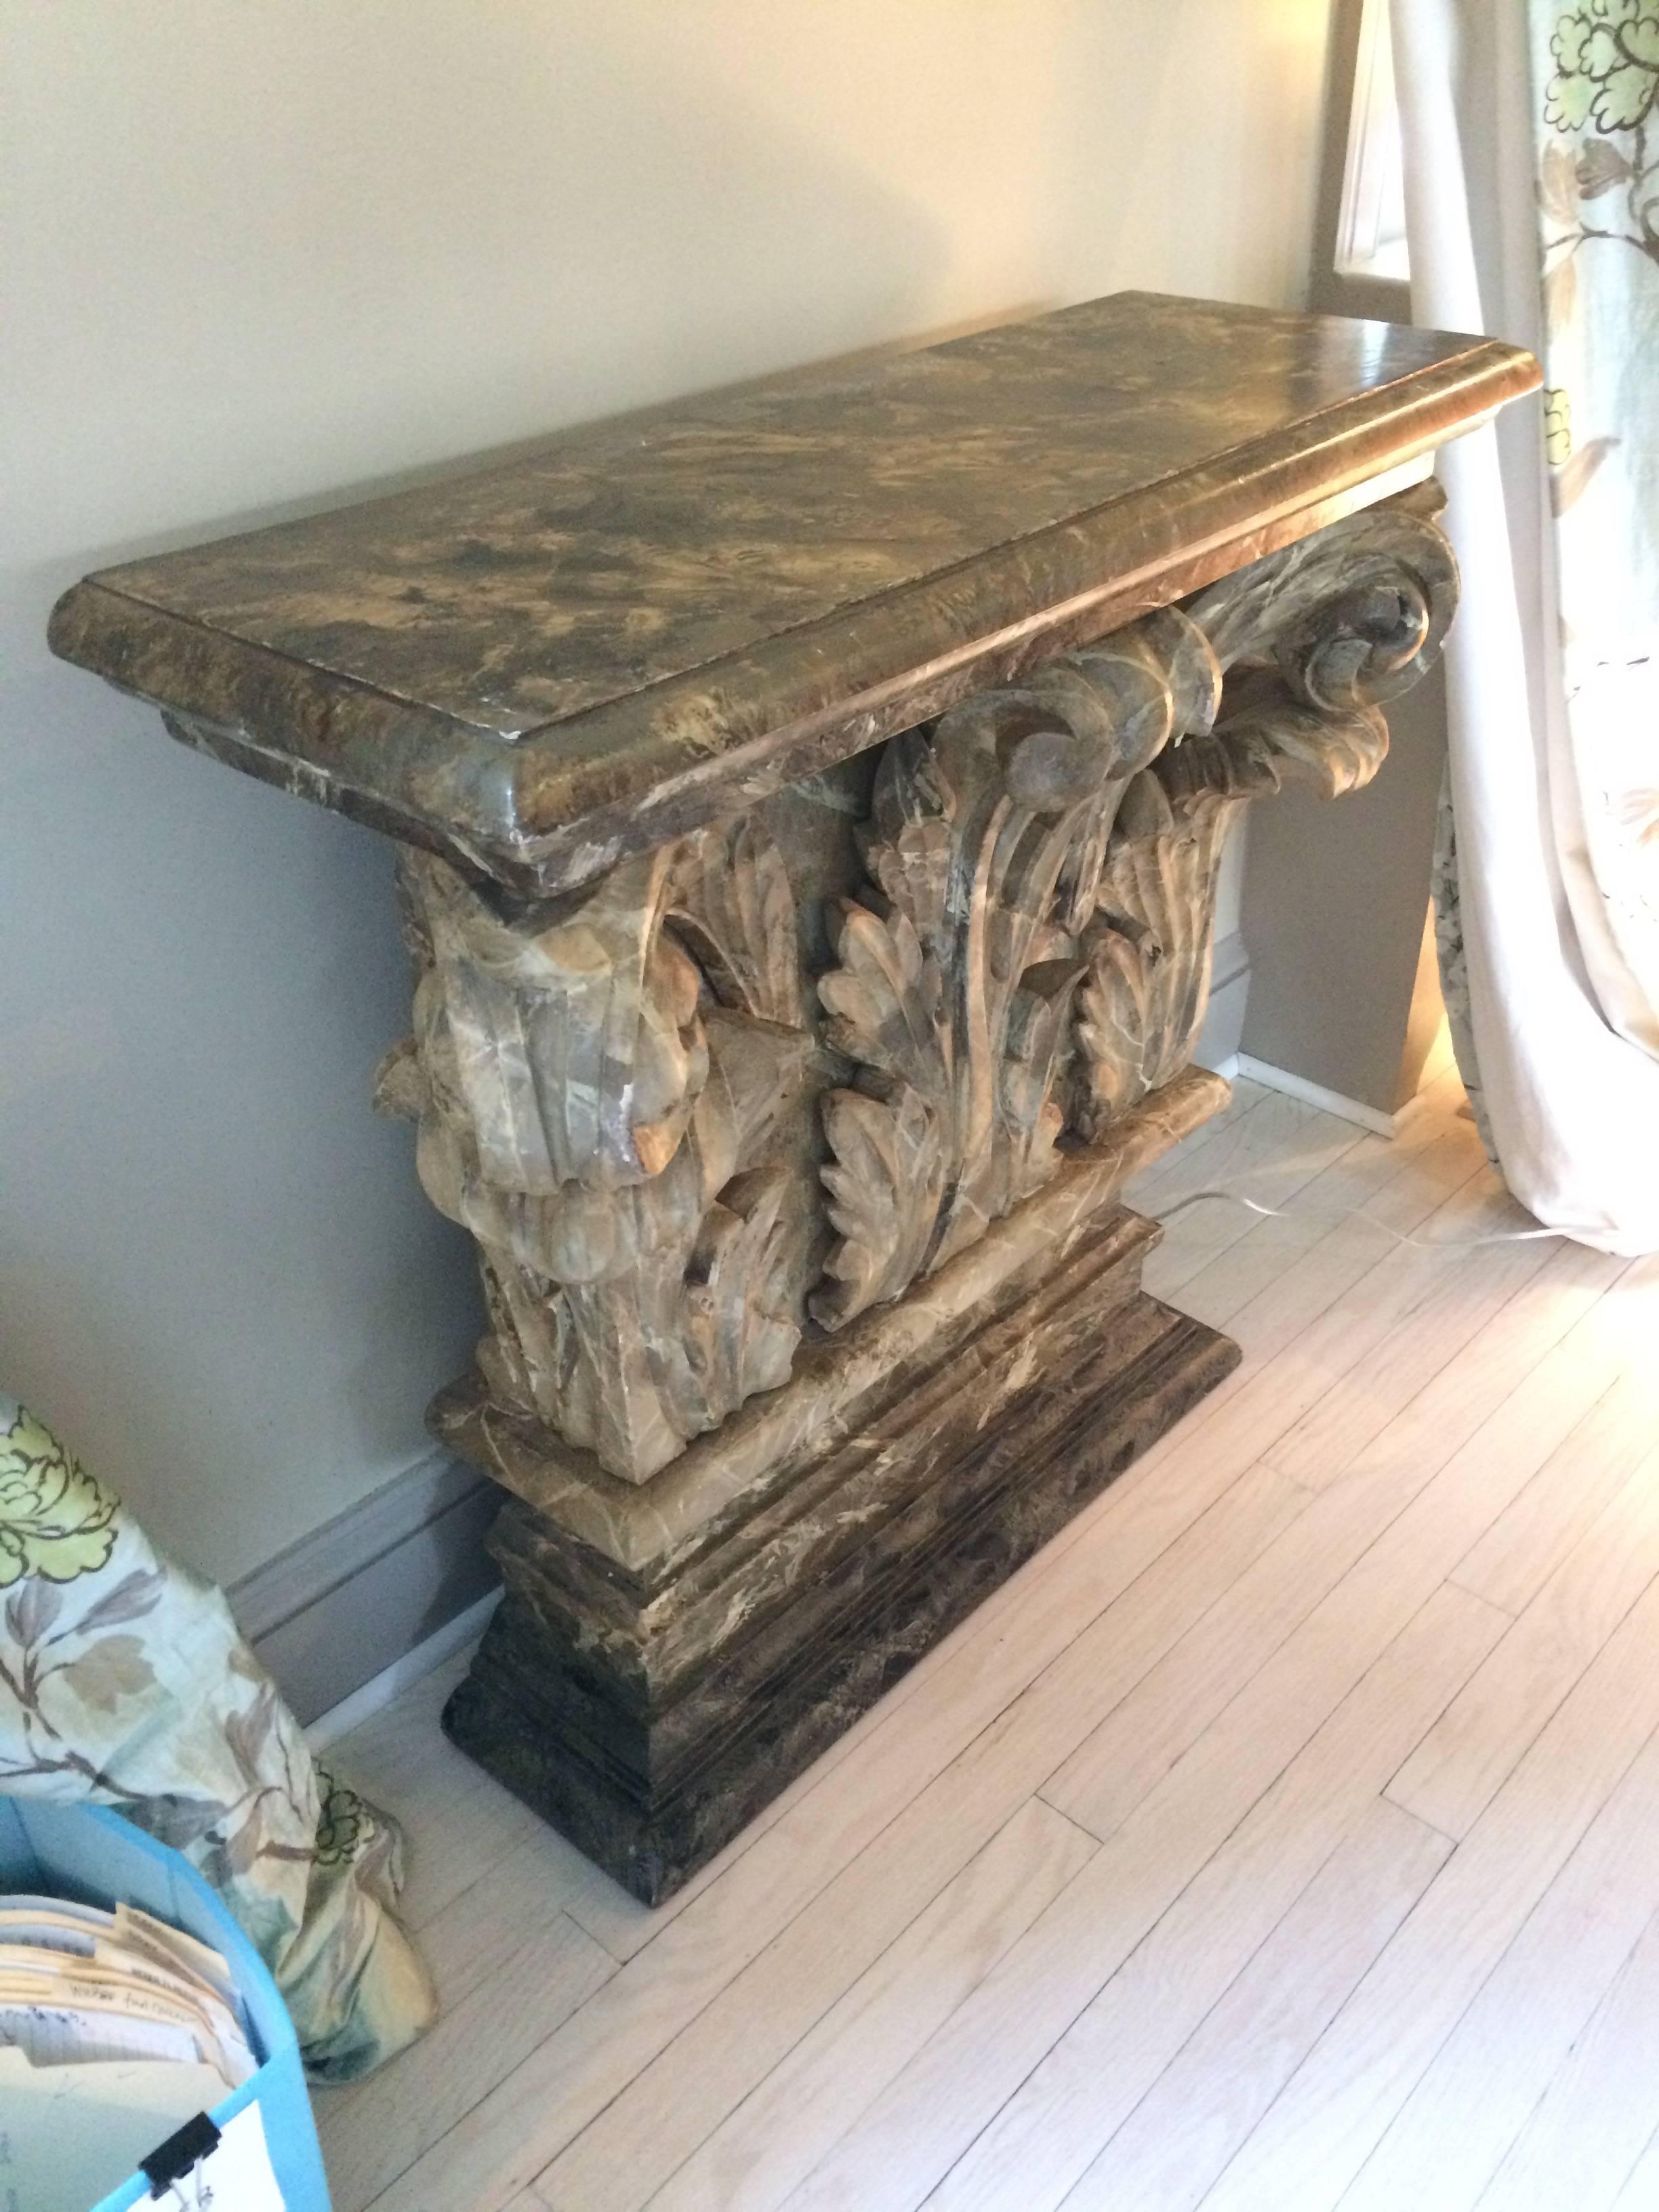 Two very impressive carved wood painted consoles from France, circa 1910, having ornate neoclassical style bases and narrow rectangular marbleized tops.
Originally purchased at the NY antique fair for 10K about 12 years ago.